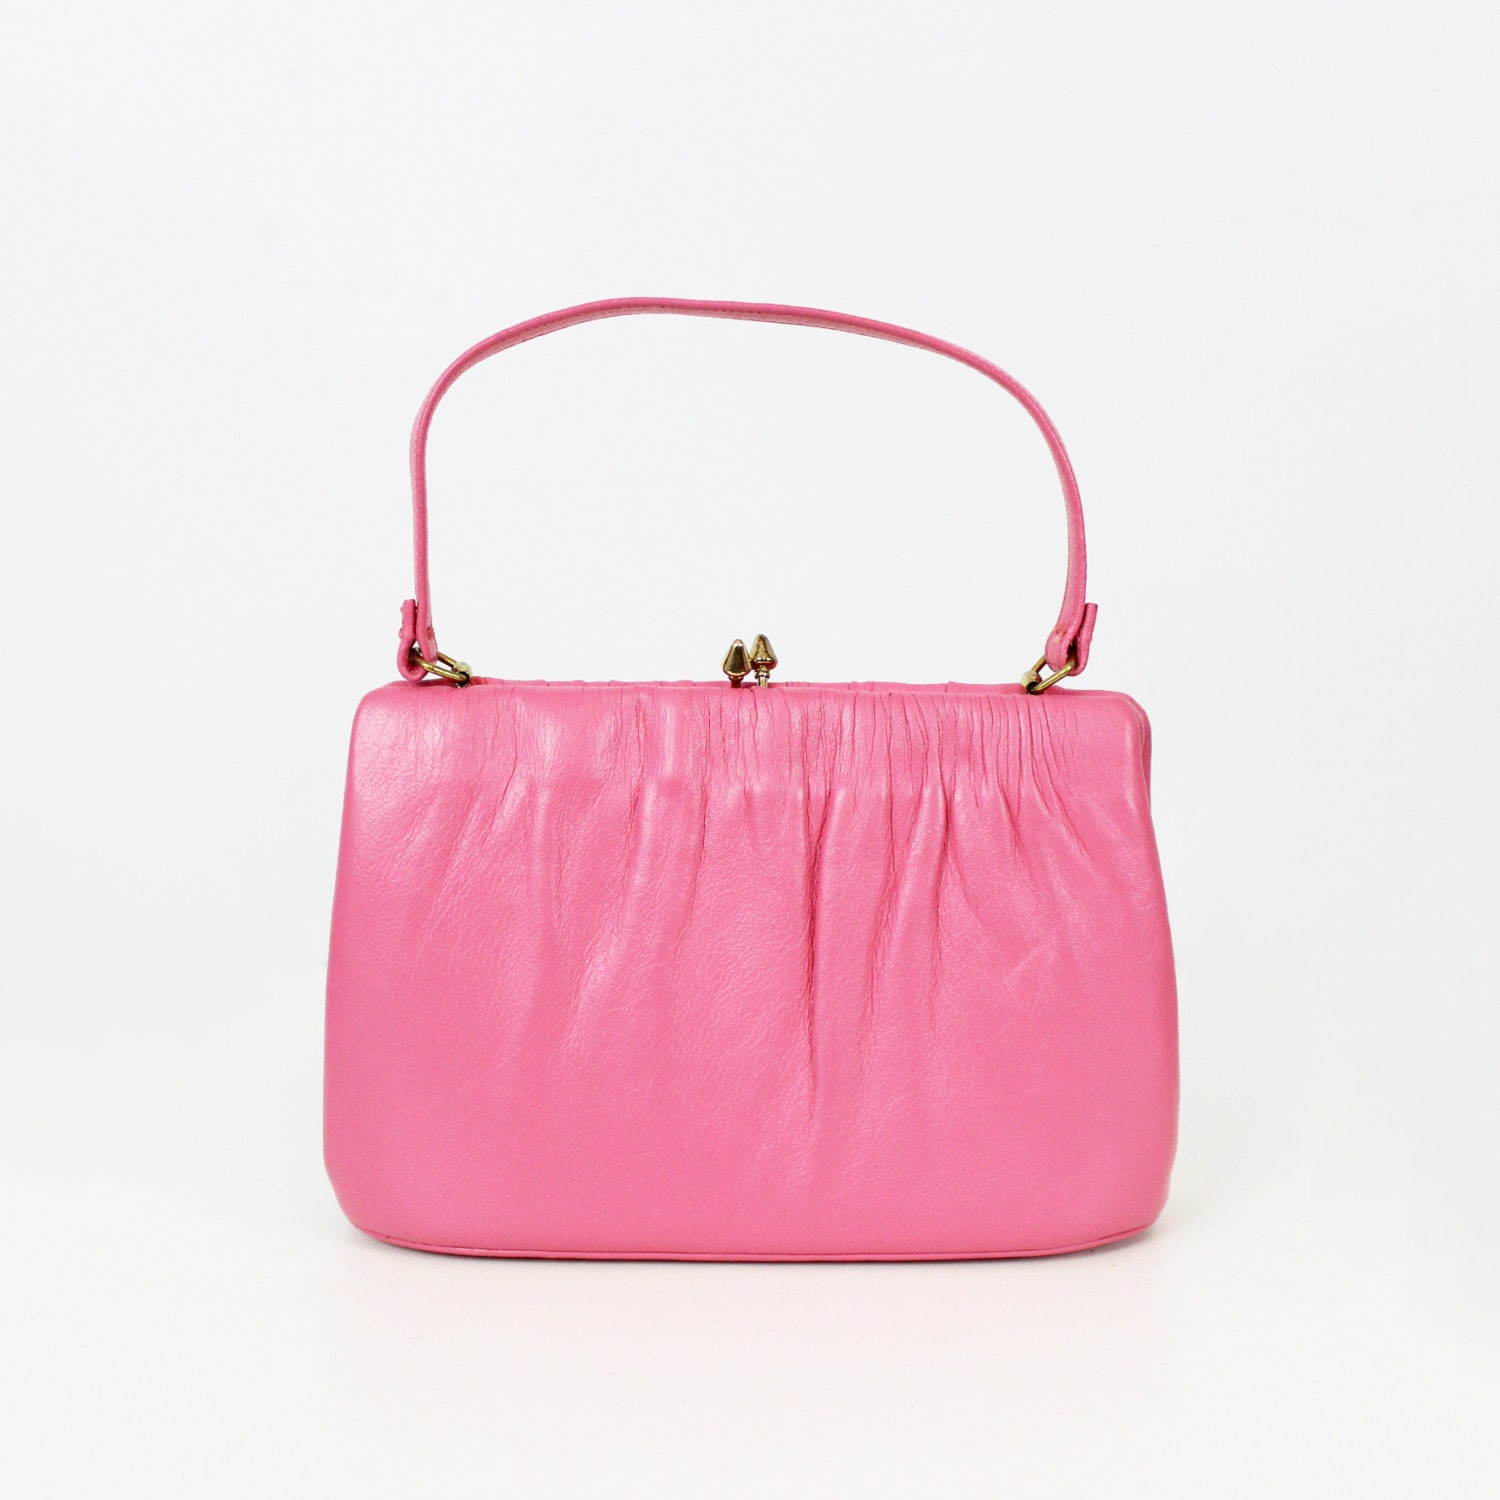 vintage 50s pink leather purse / 1950s pink by archetypevintage